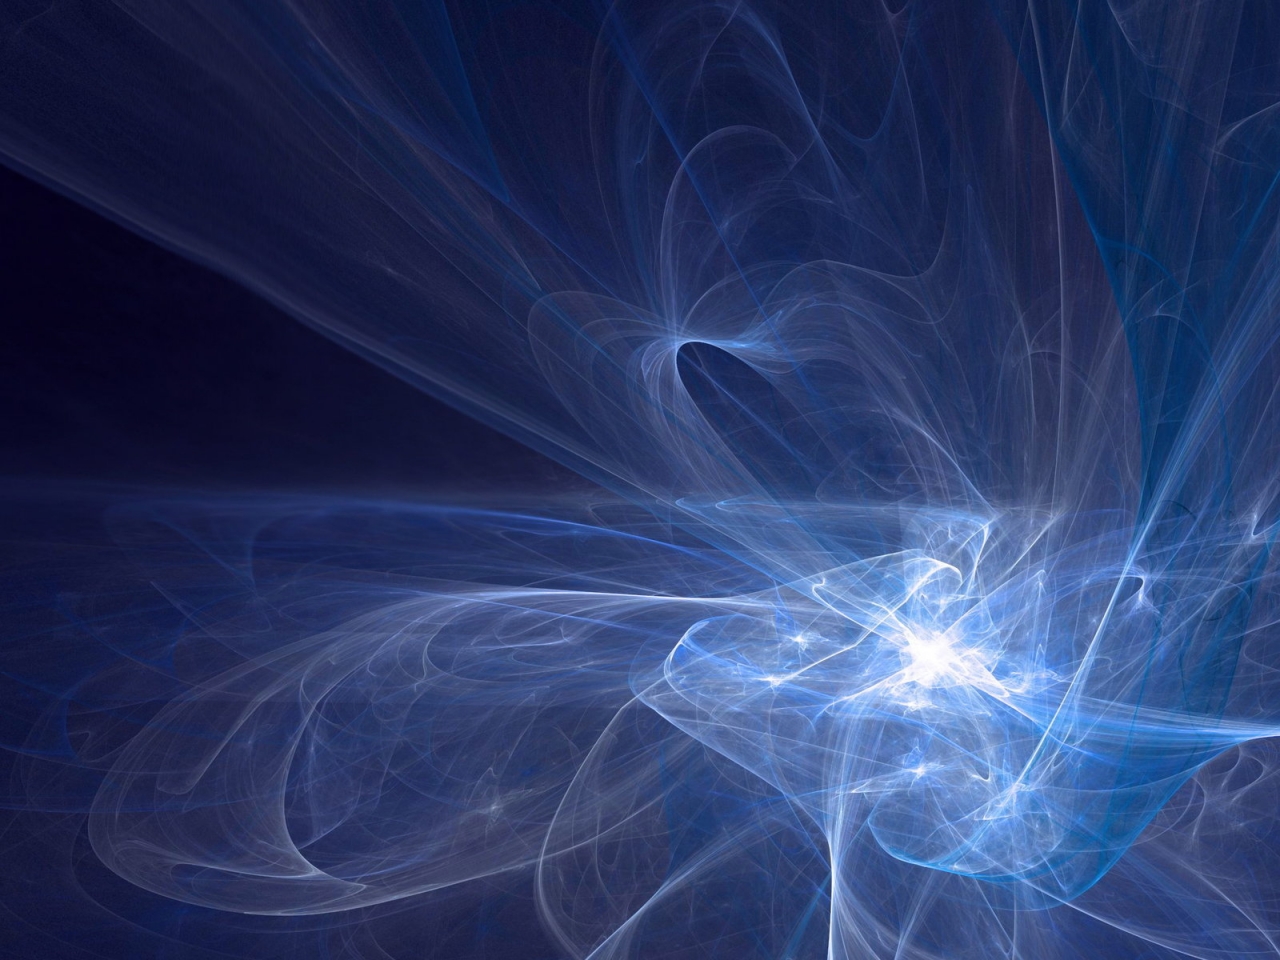 Great Blue Fractal for 1280 x 960 resolution